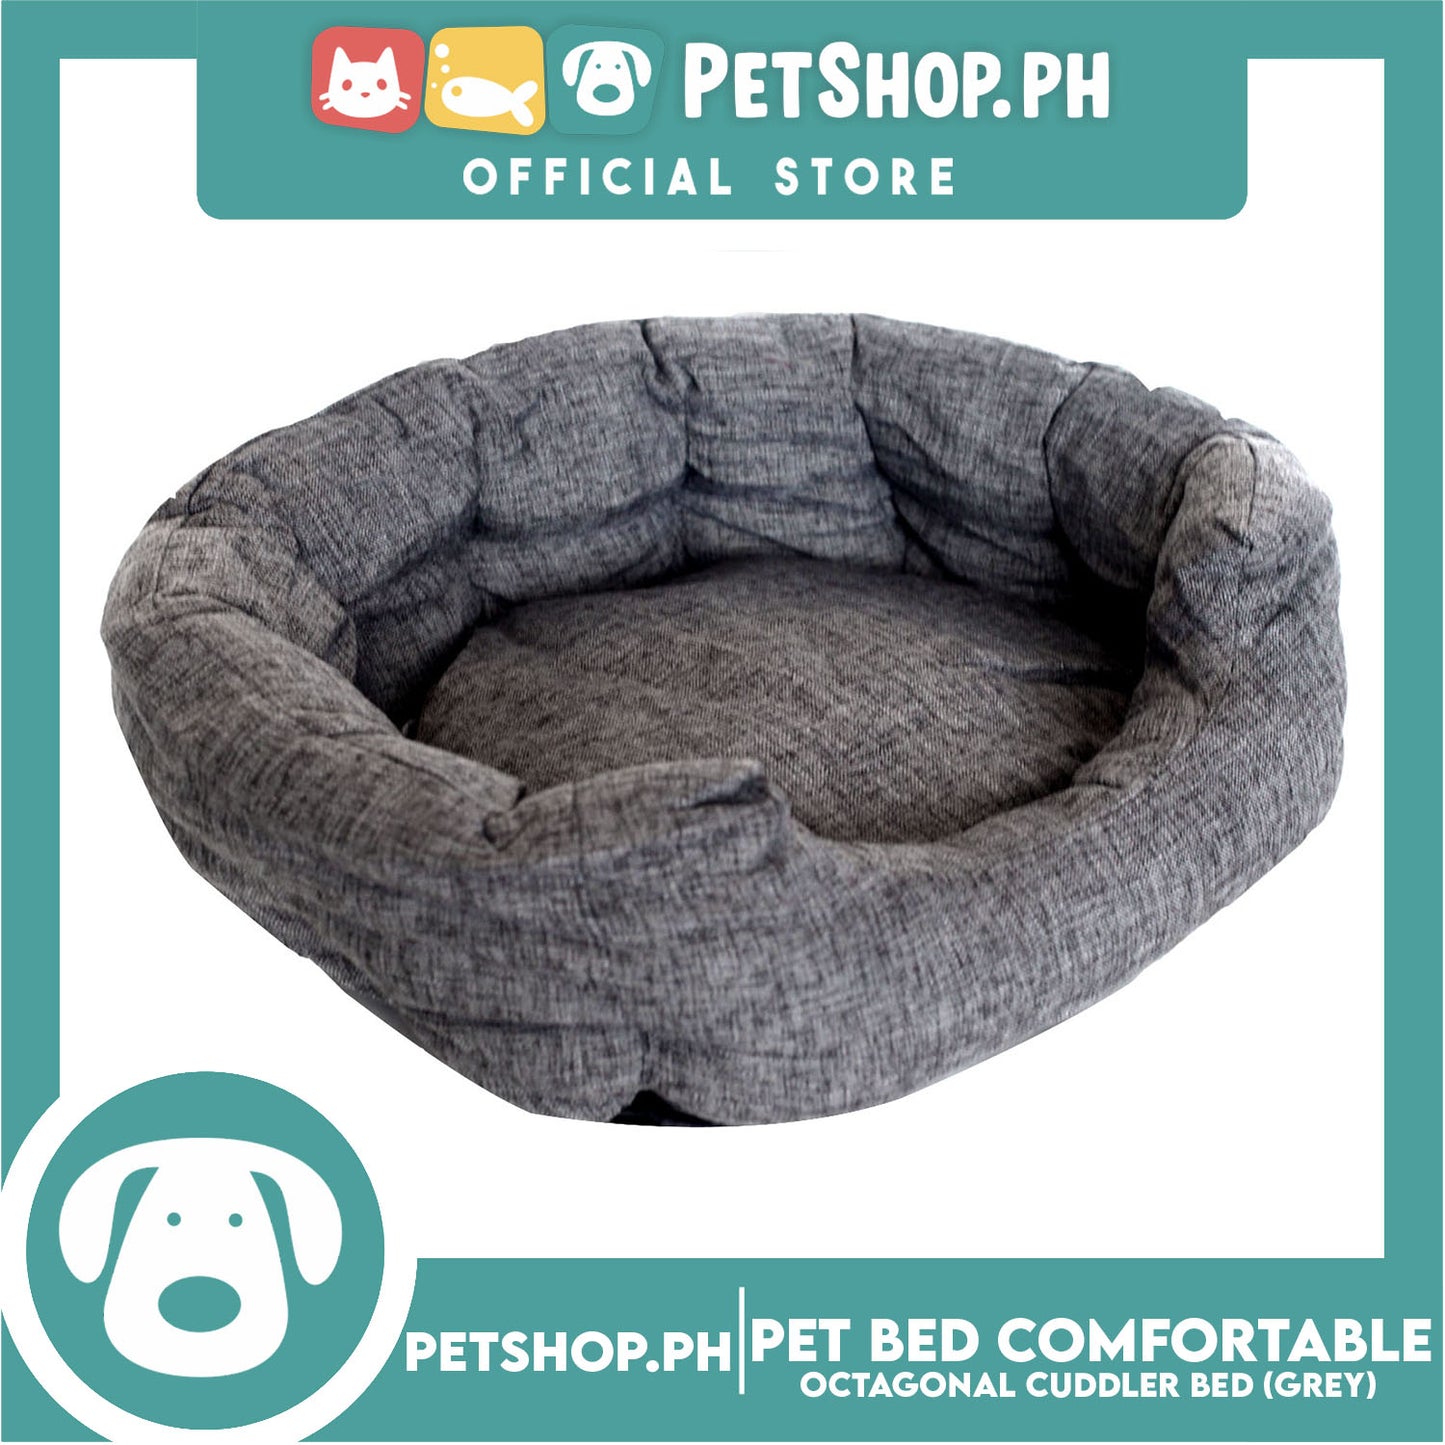 Pet Bed Comfortable Octagonal Cuddler Dog Bed 55x47x18cm Medium for Dogs & Cats (Grey)